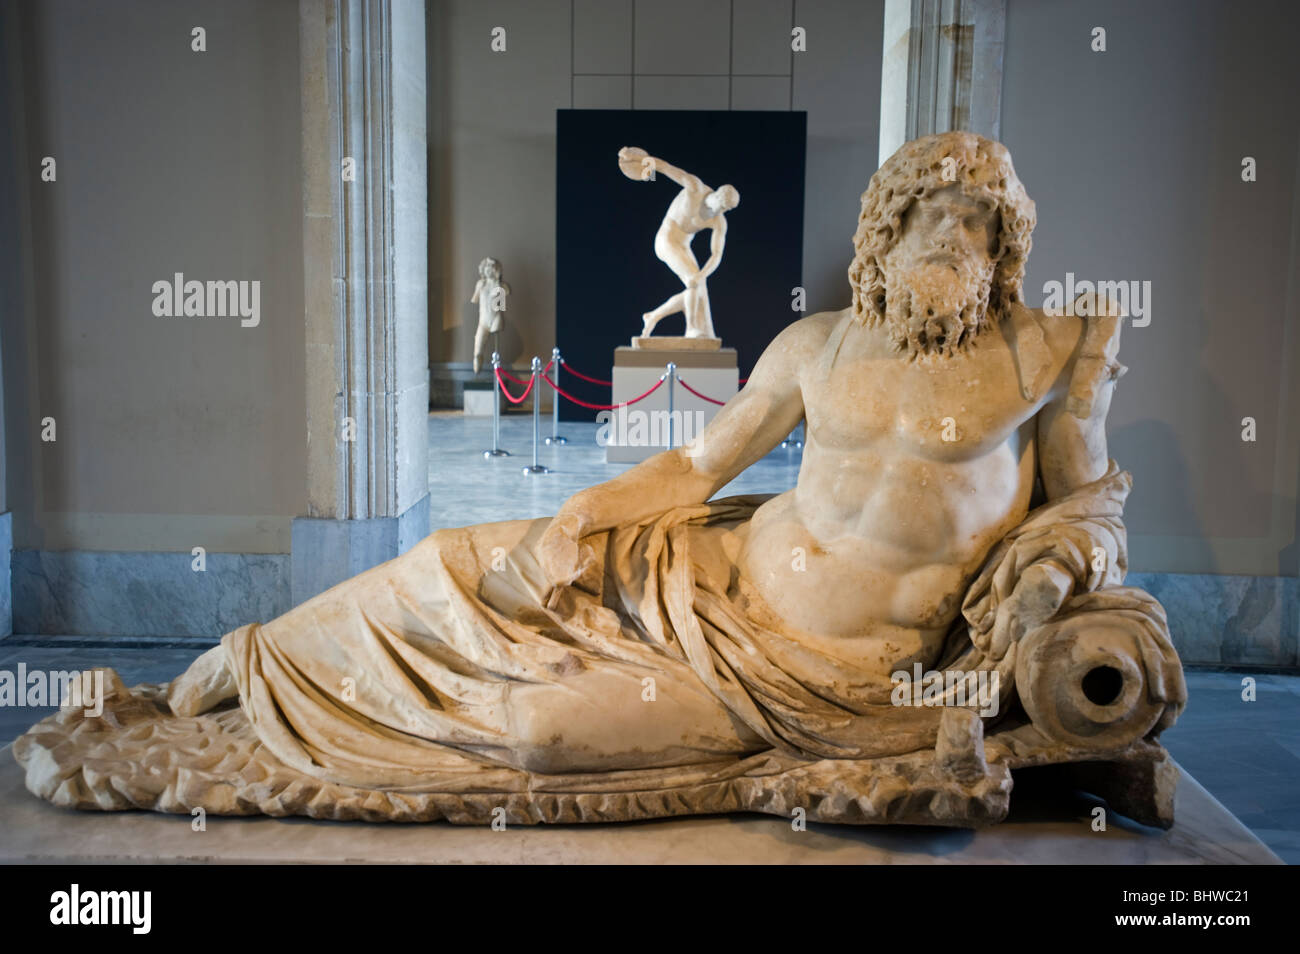 Statue of Oceanus, 2nd century AD, Ephesus, and disc thrower behind, Istanbul Archaeology Museum Turkey. Stock Photo